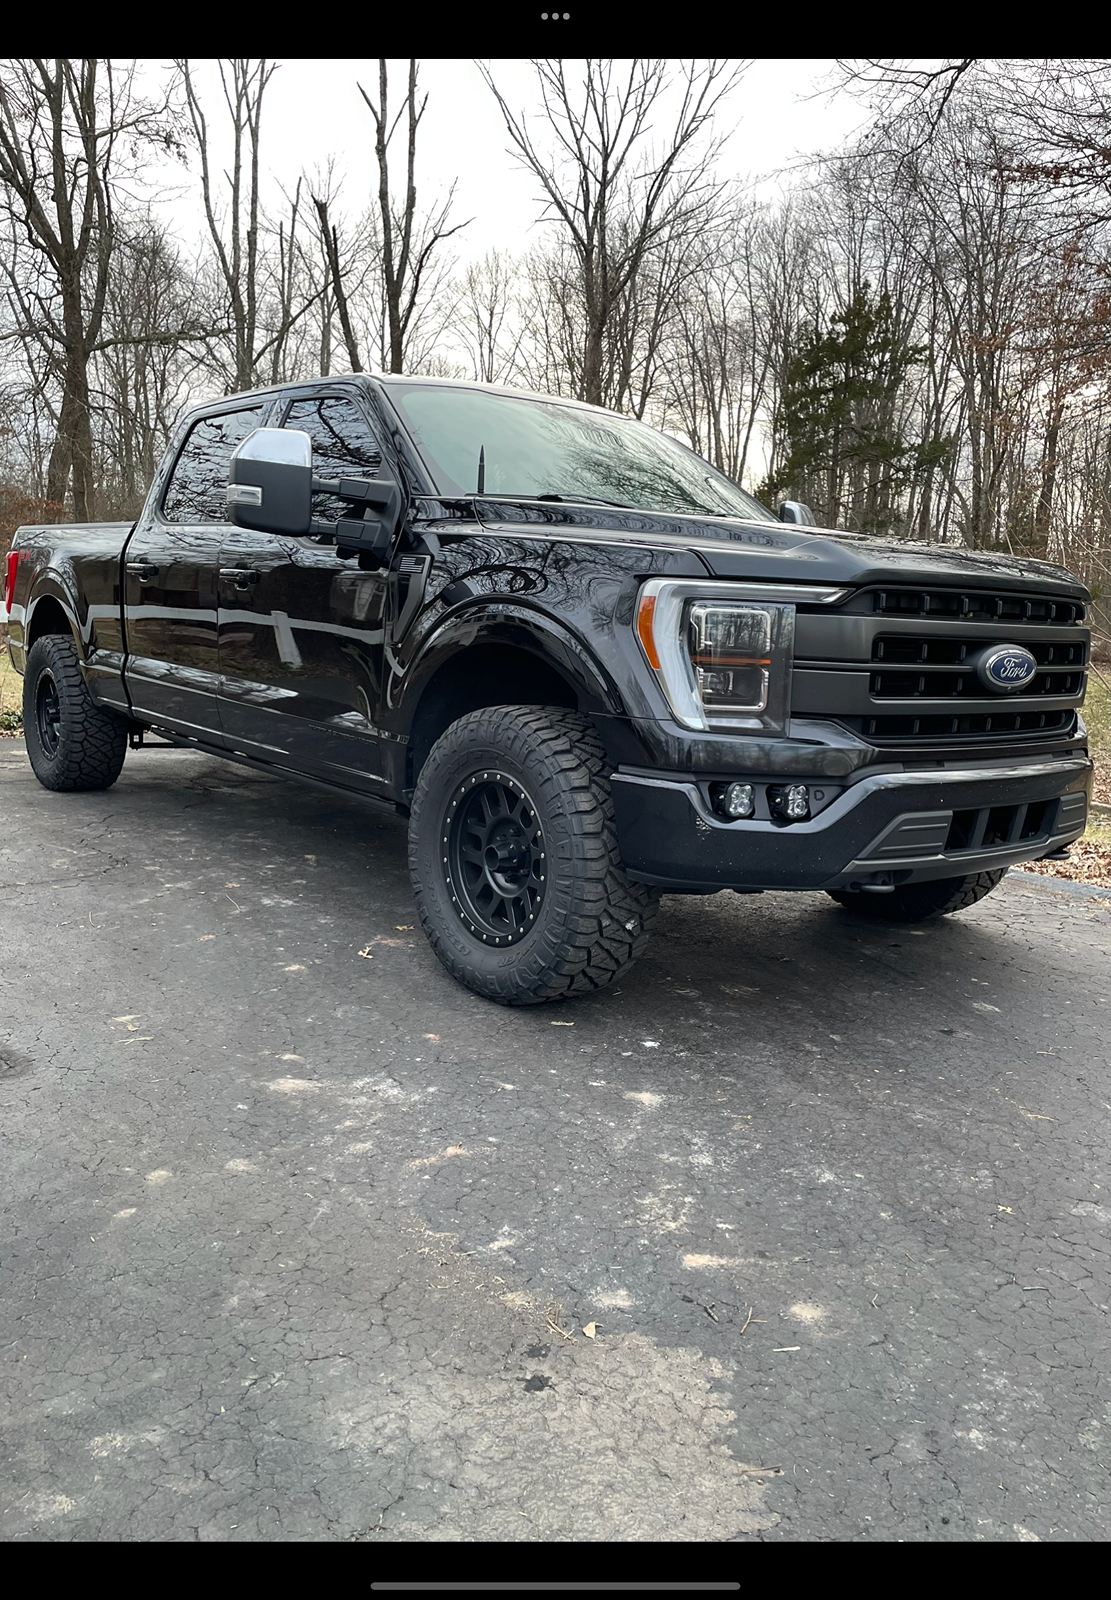 Ford F-150 Leveled or Lifted "Long Bed" 157" Wheel Base Photo Thread IMG_0068